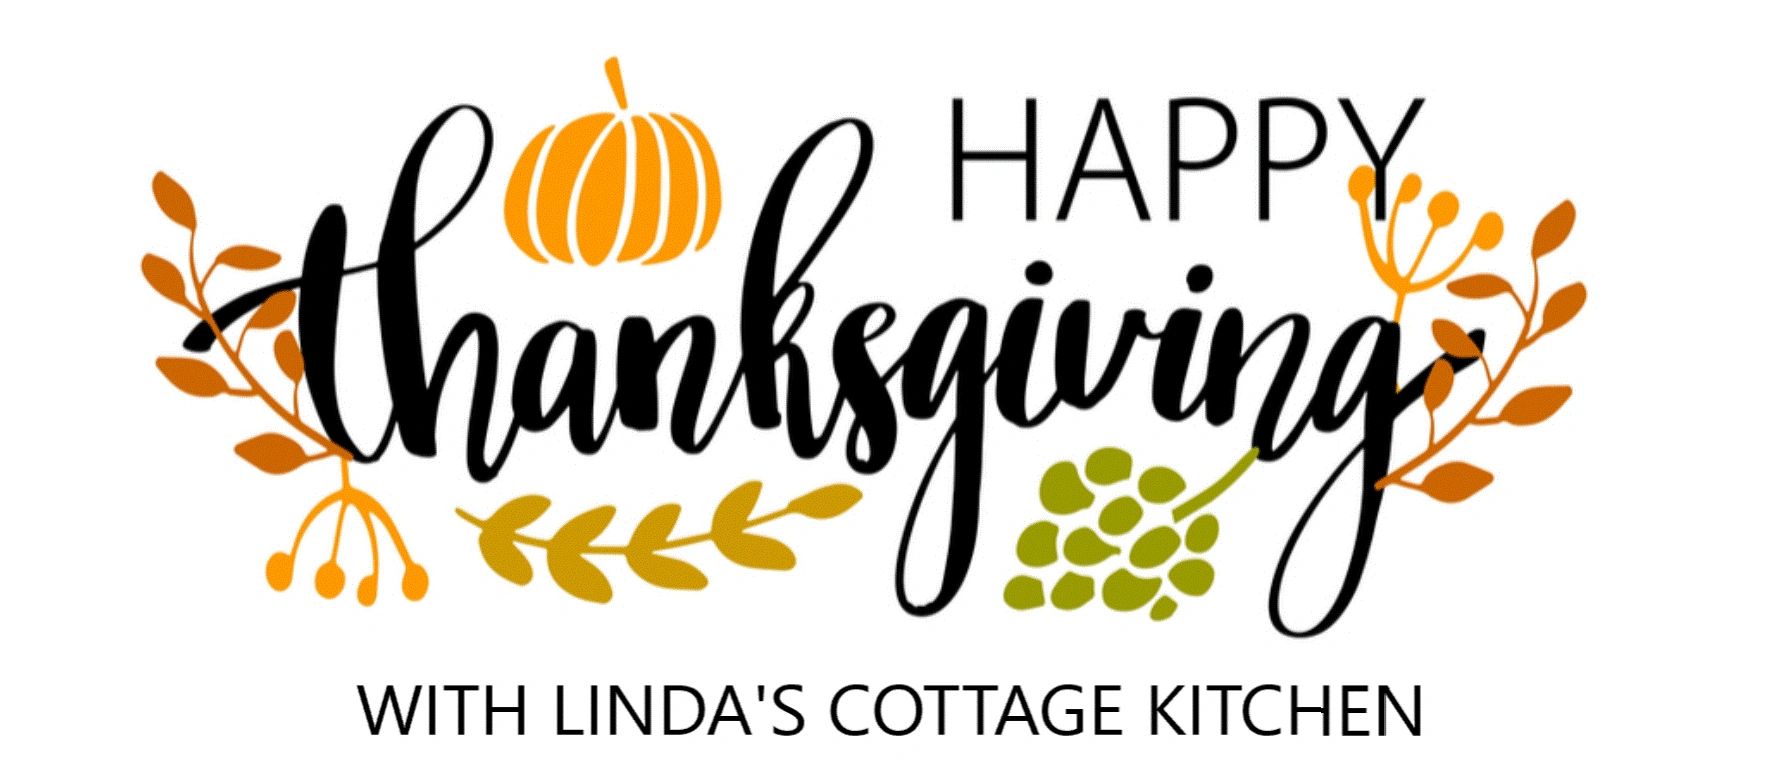 Happy Thanksgiving with Linda's Cottage Kitchen